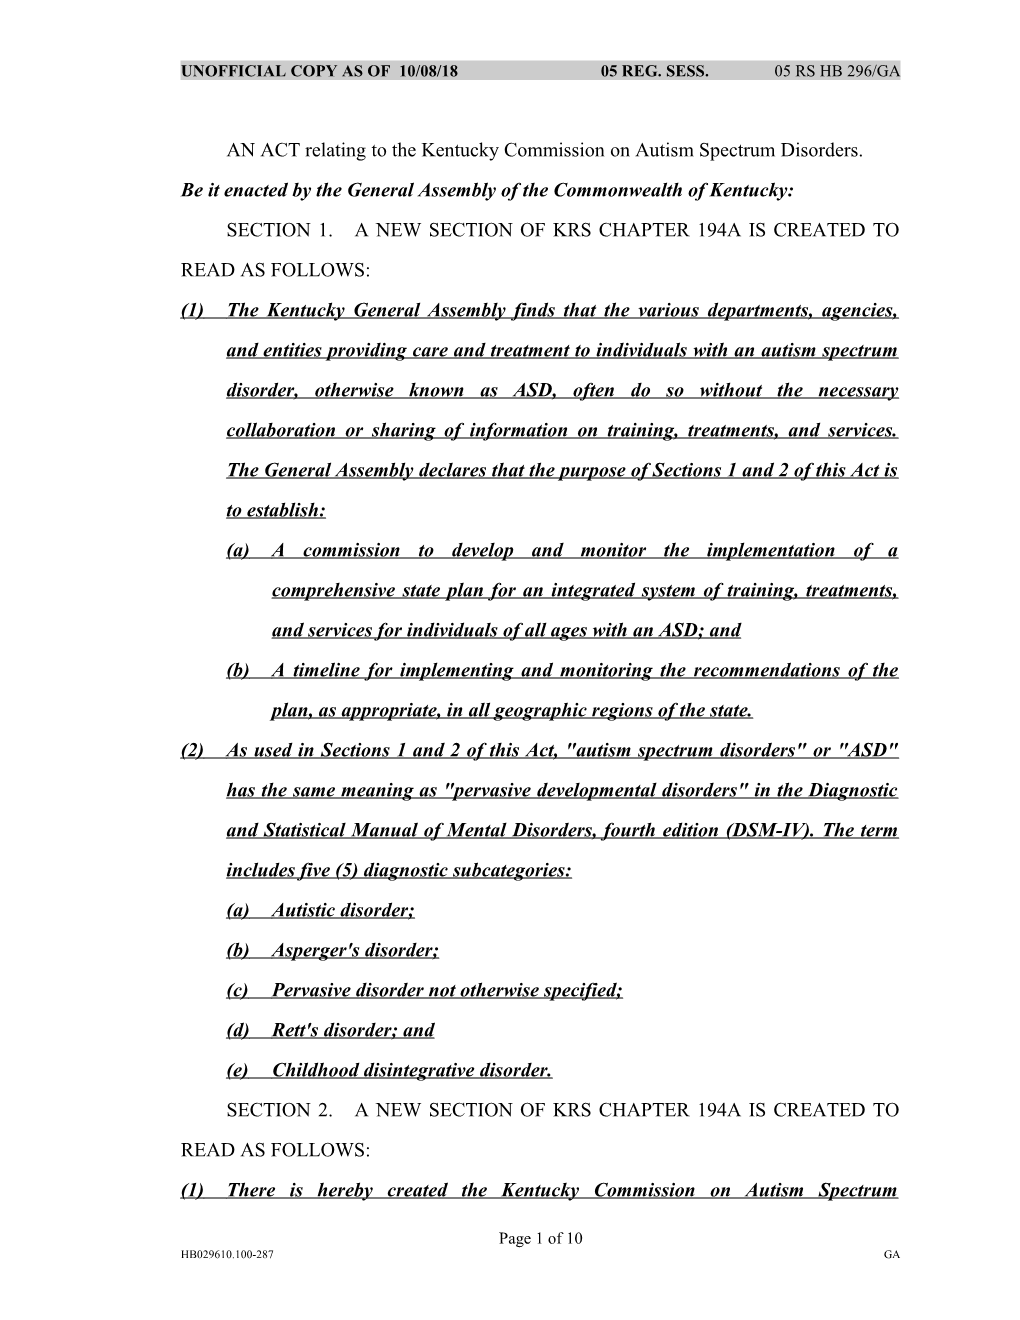 AN ACT Relating to the Kentucky Commission on Autism Spectrum Disorders